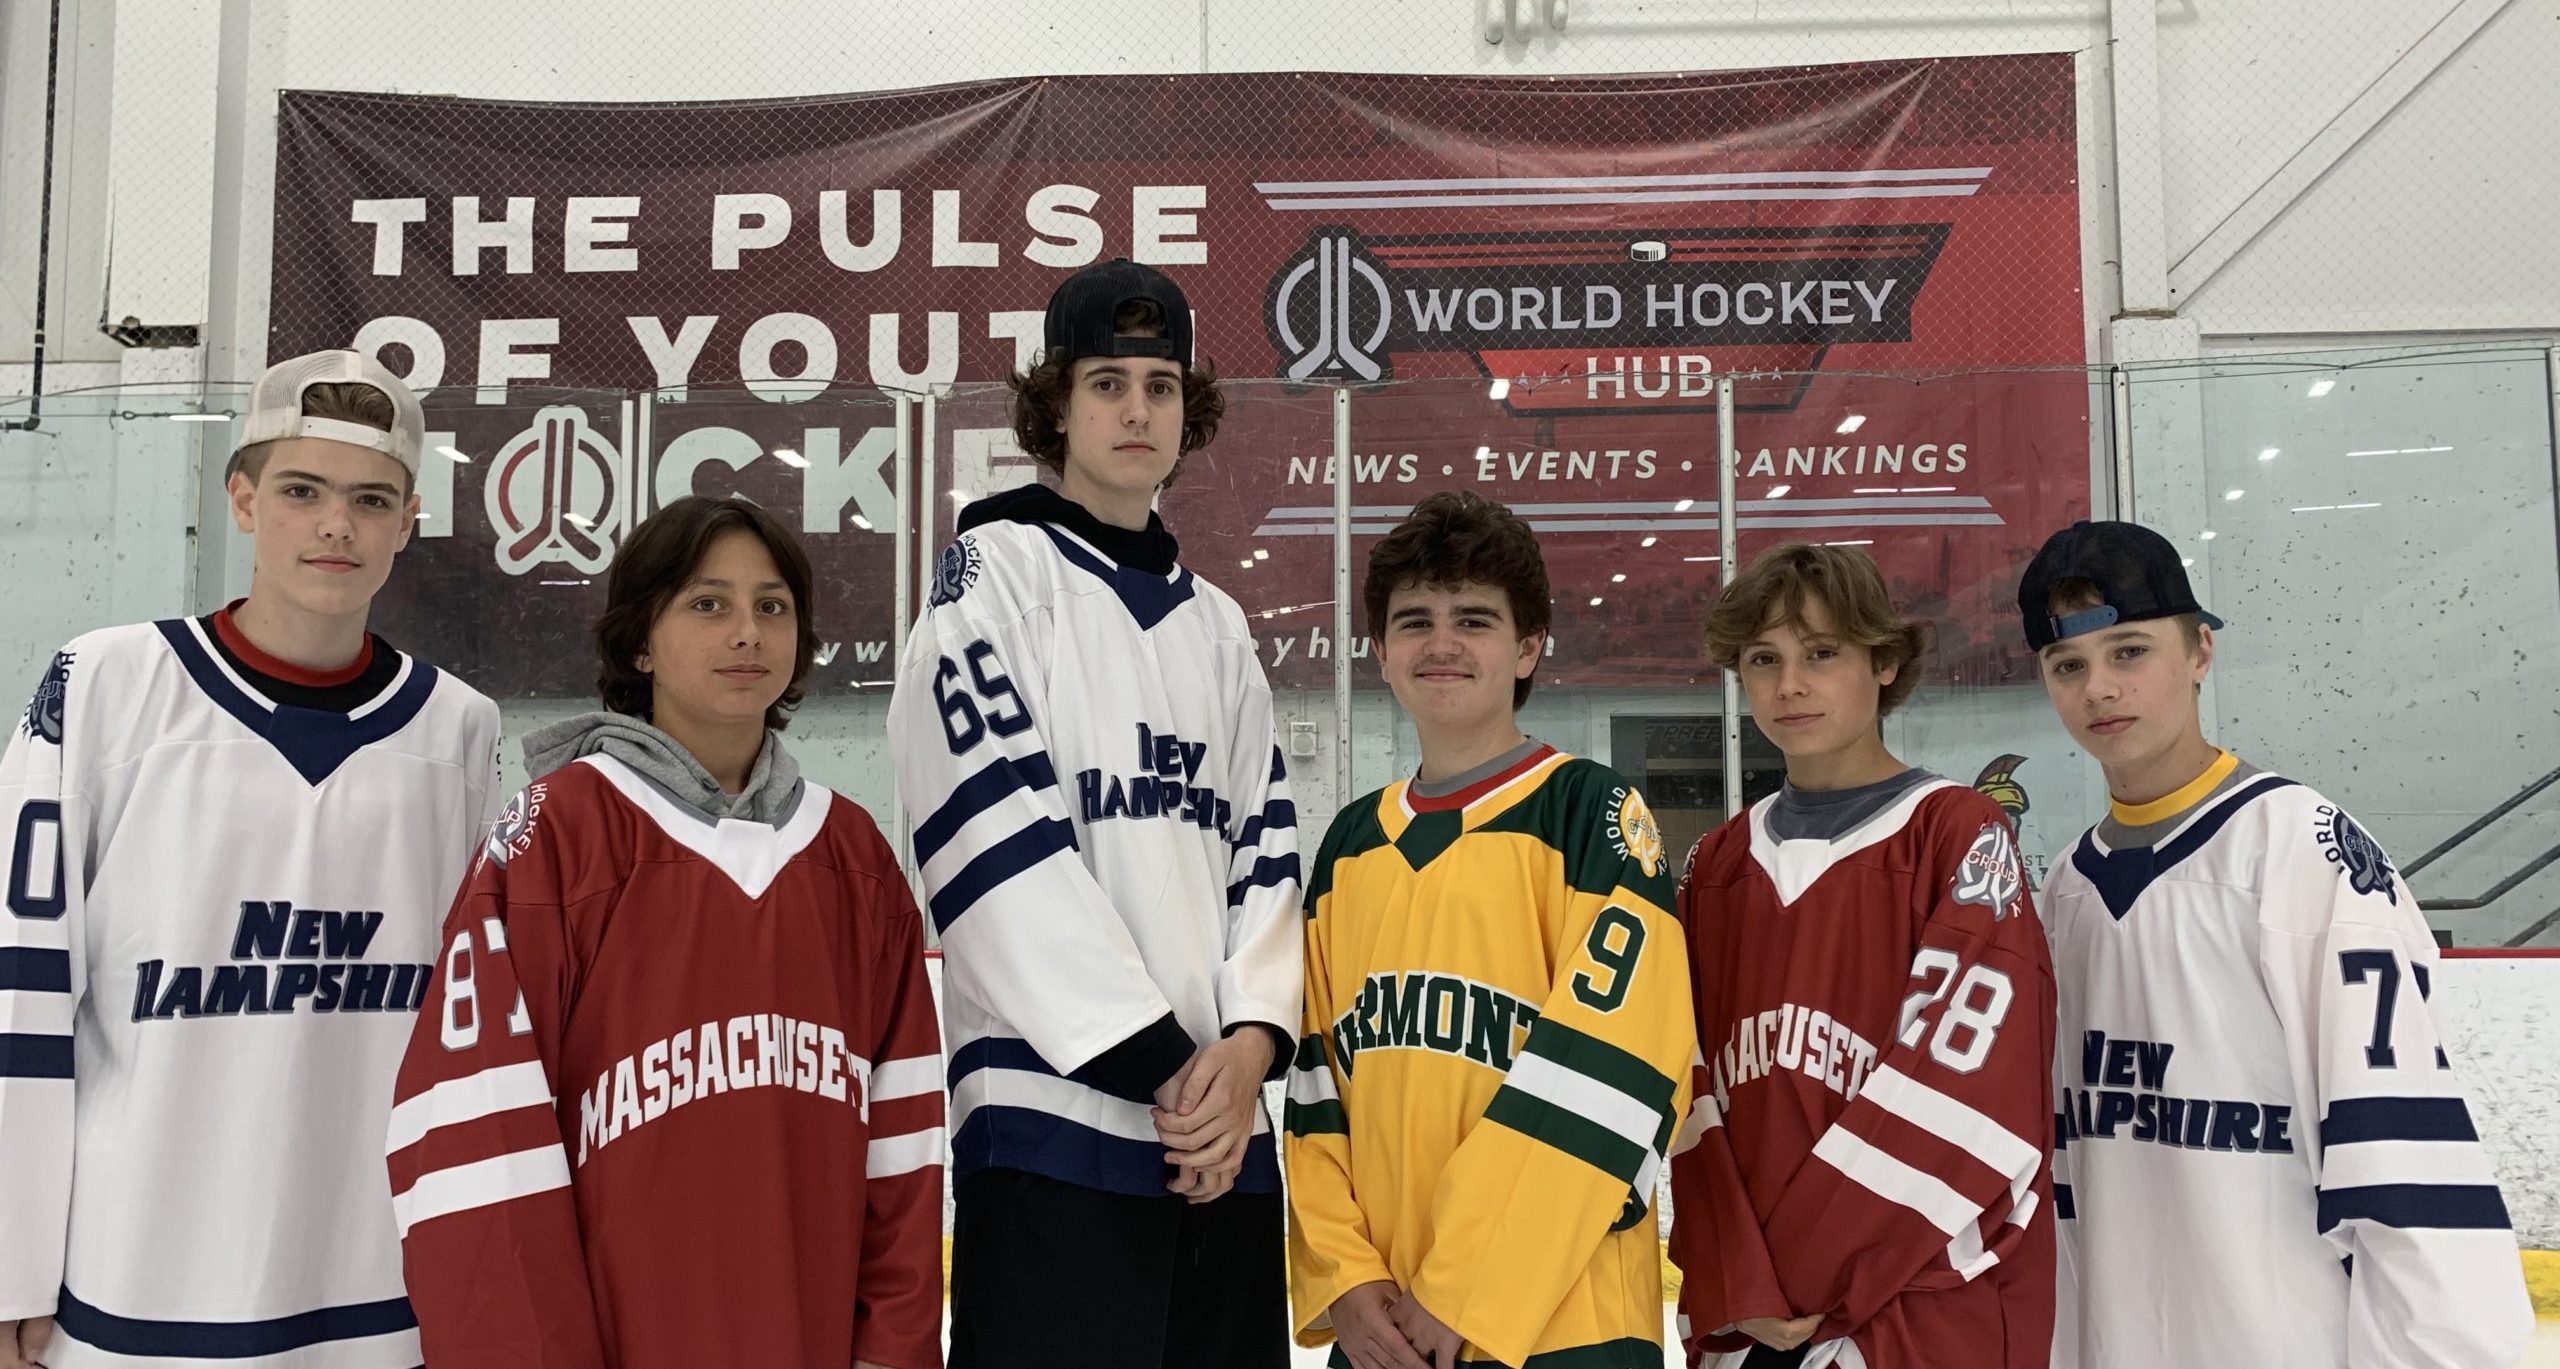 Players pose in jerseys for the New England States Rivalry Challenge.